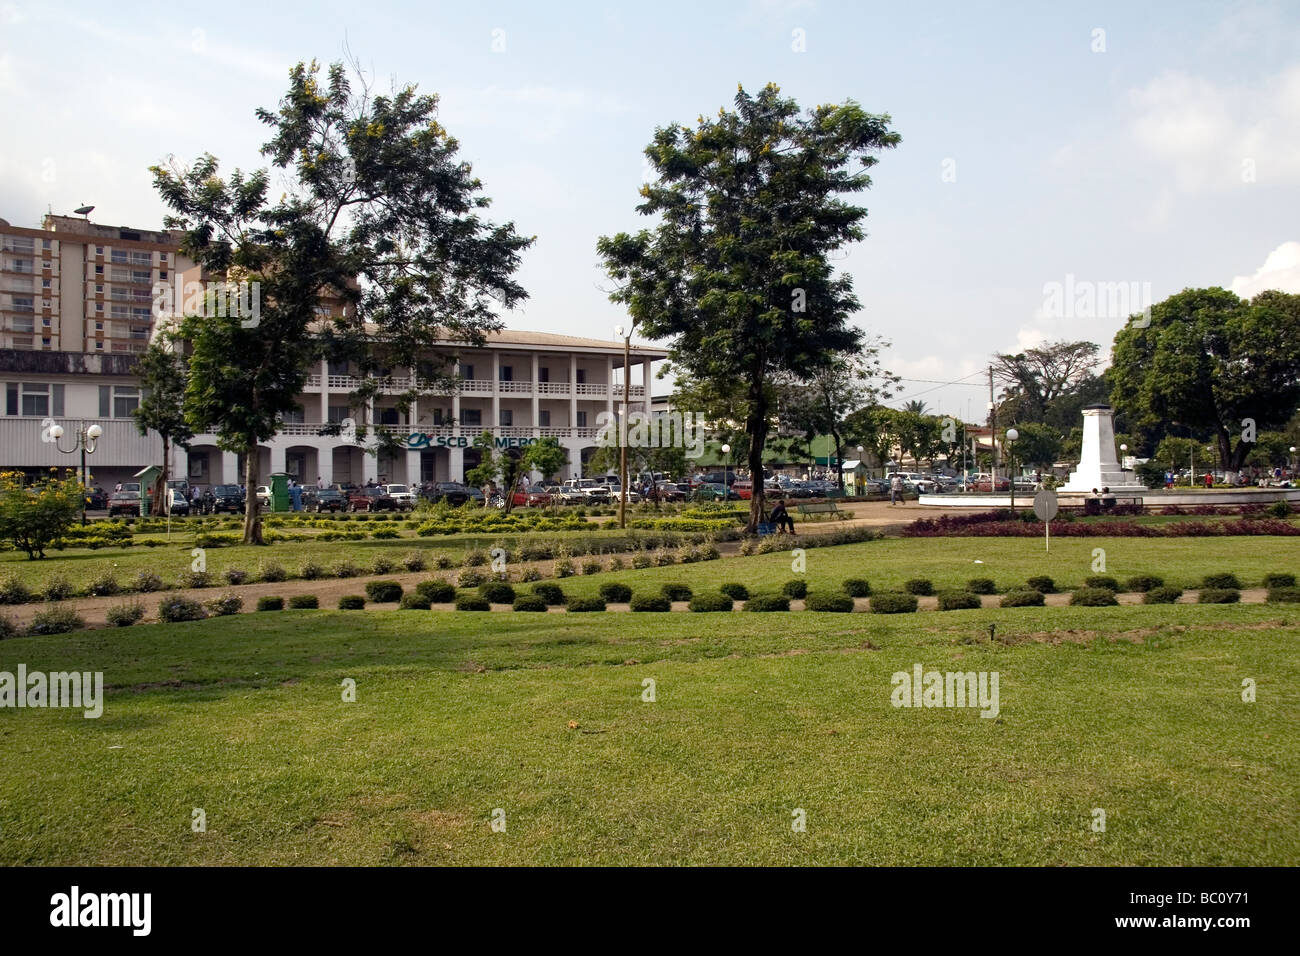 Place du Gouvernement Small park area in centre of Bonanjo administrative district Douala Cameroon West Africa Stock Photo